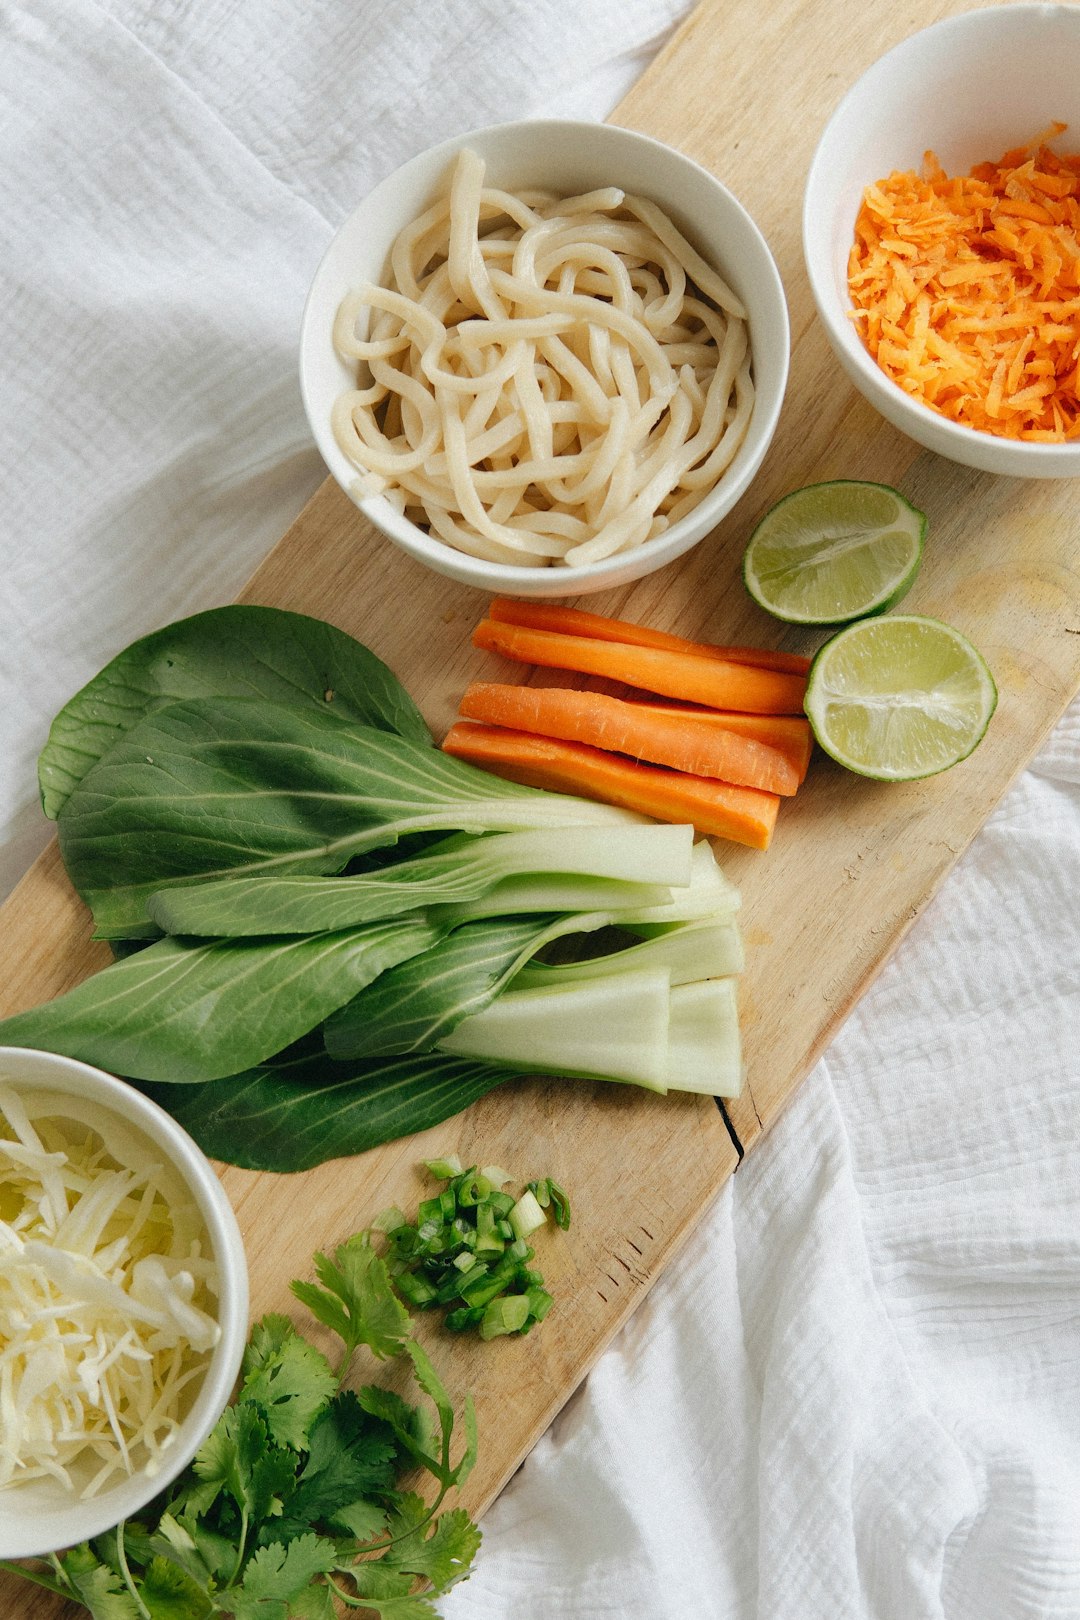 white pasta with carrots and green leaf vegetable on brown wooden chopping board